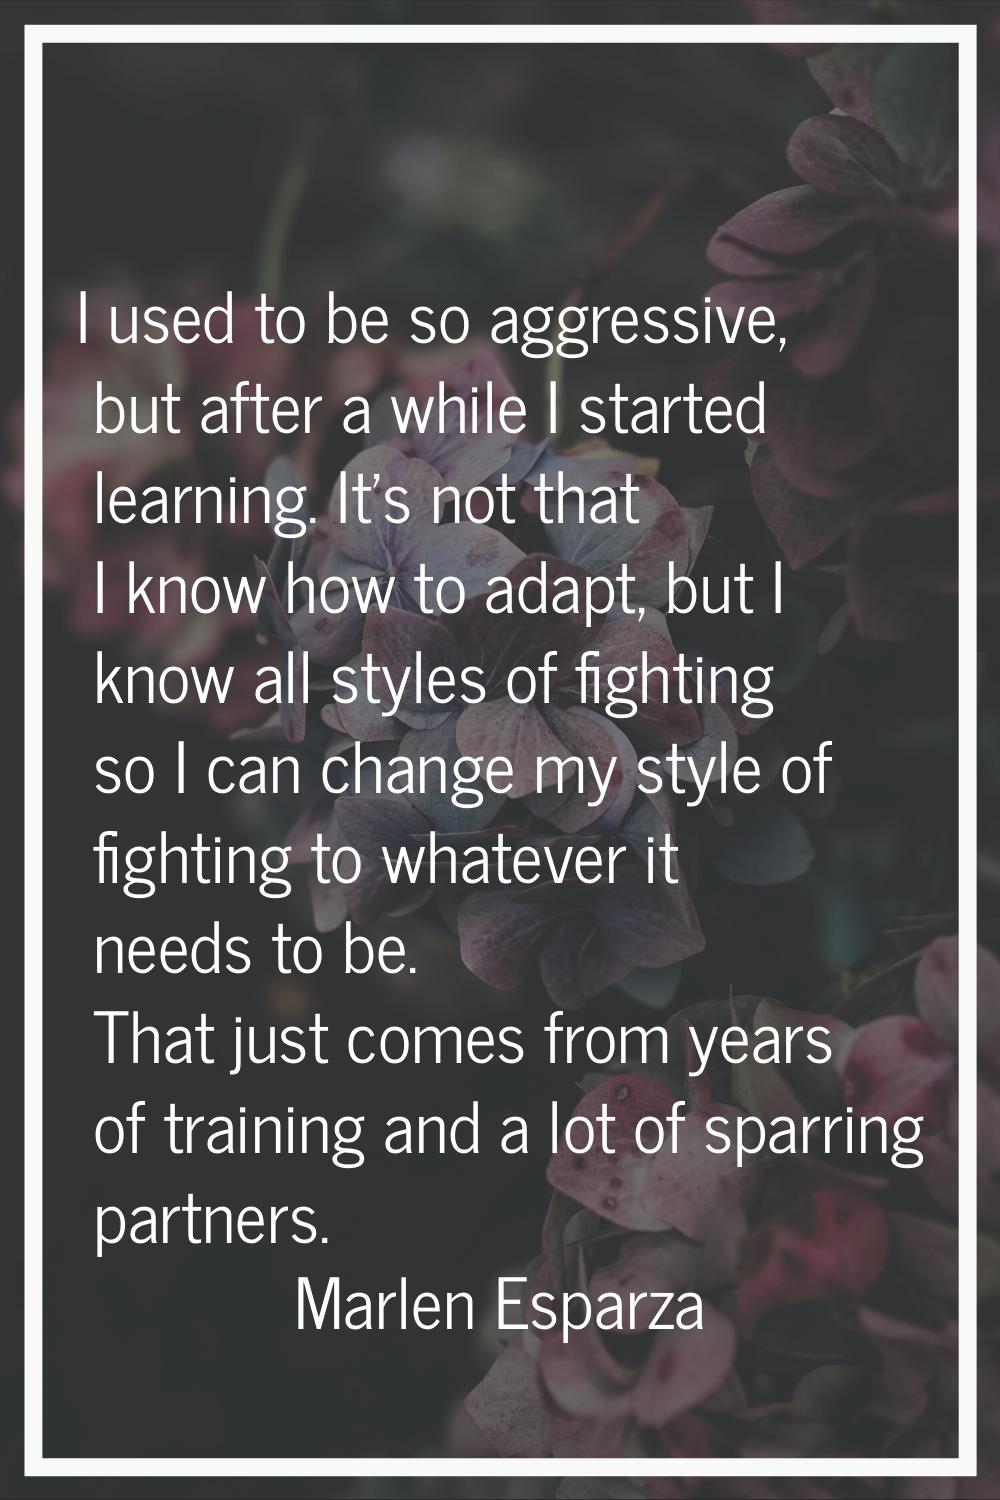 I used to be so aggressive, but after a while I started learning. It's not that I know how to adapt